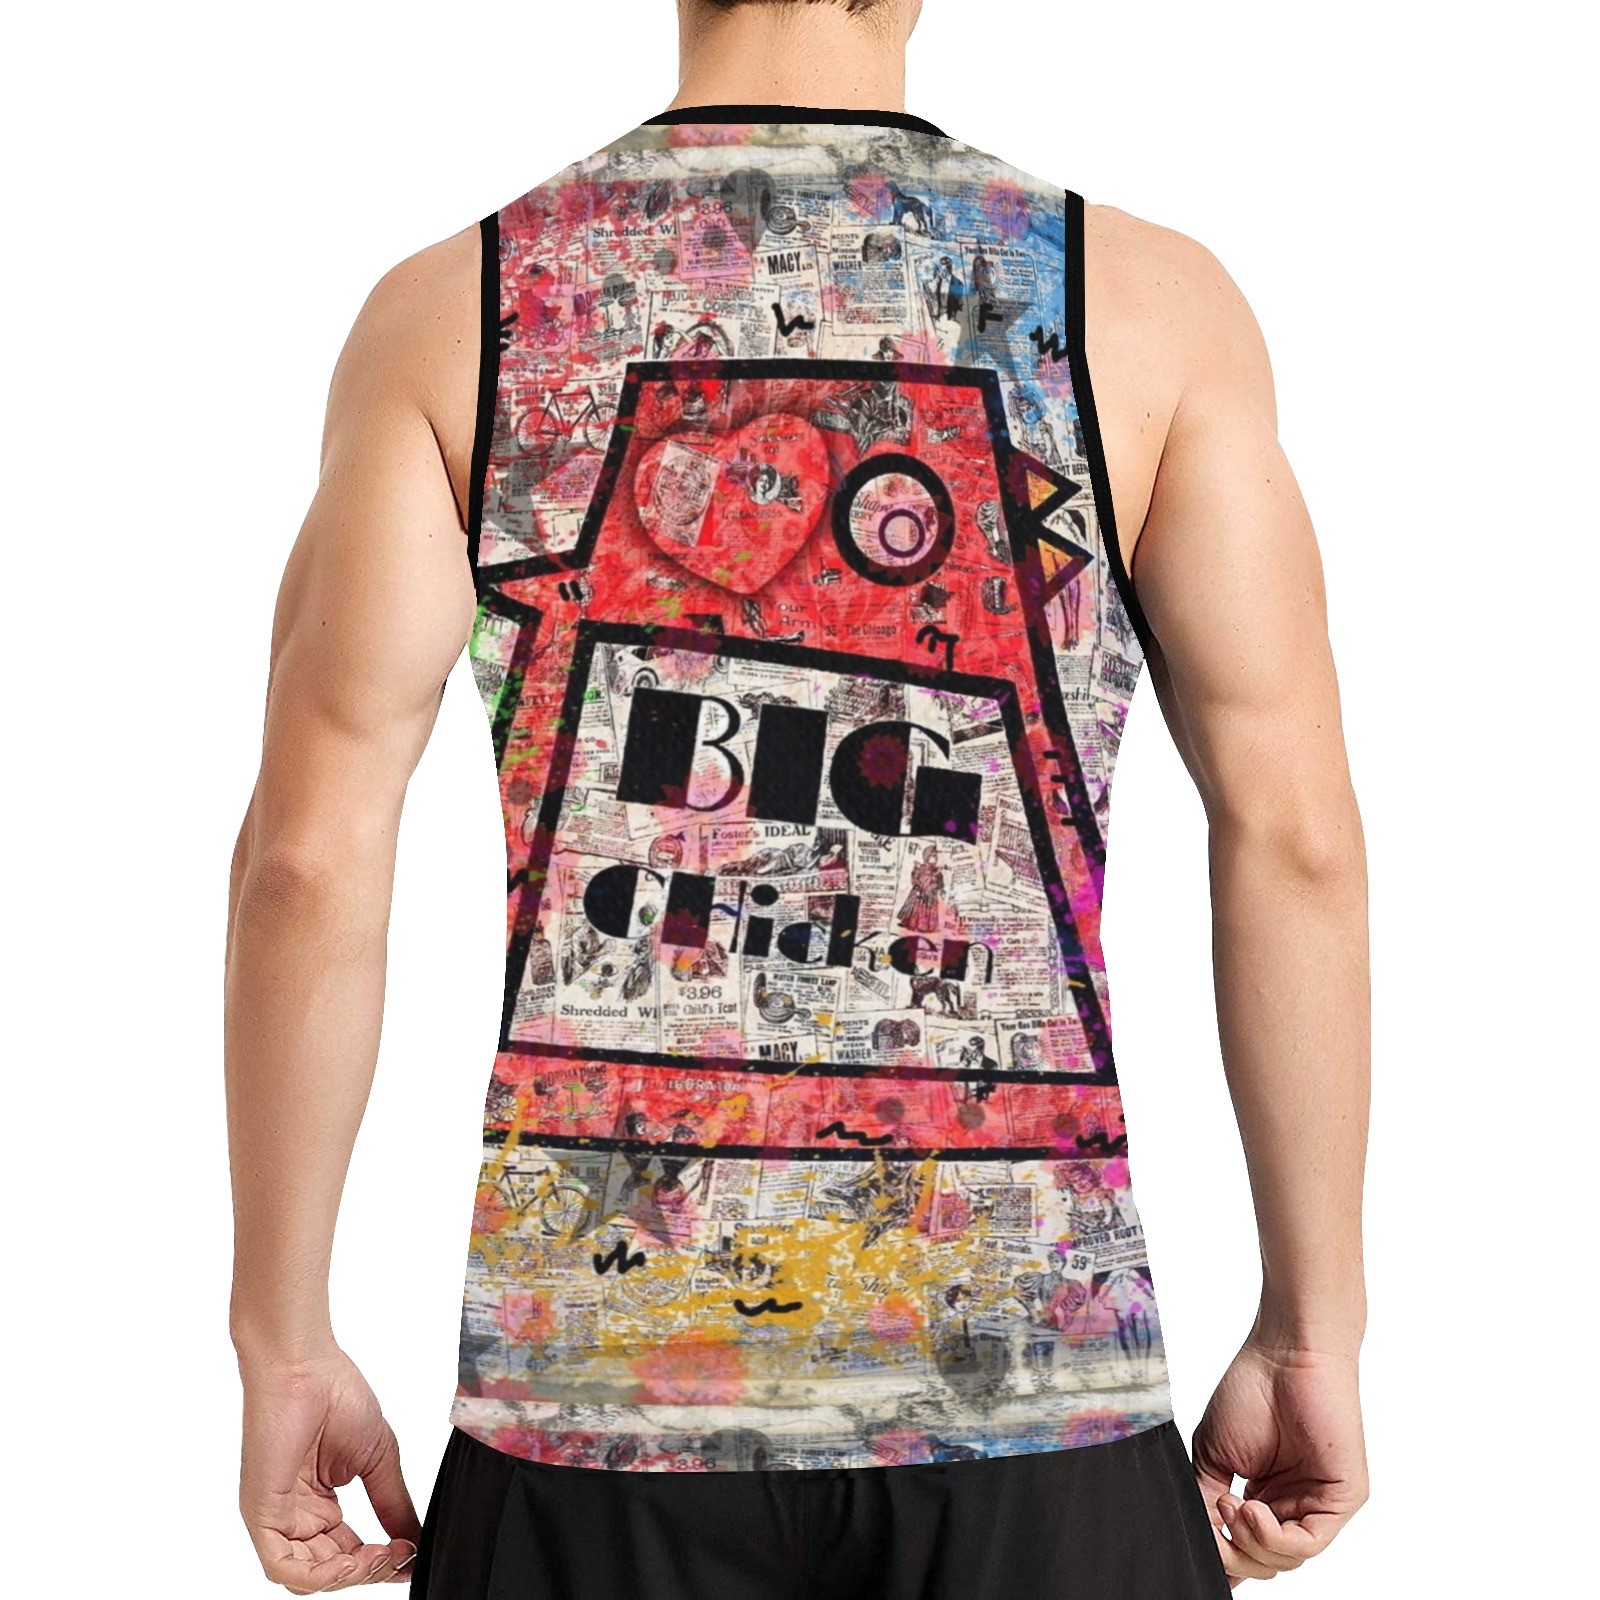 Big Chicken Paper by Nico Bielow All Over Print Basketball Jersey